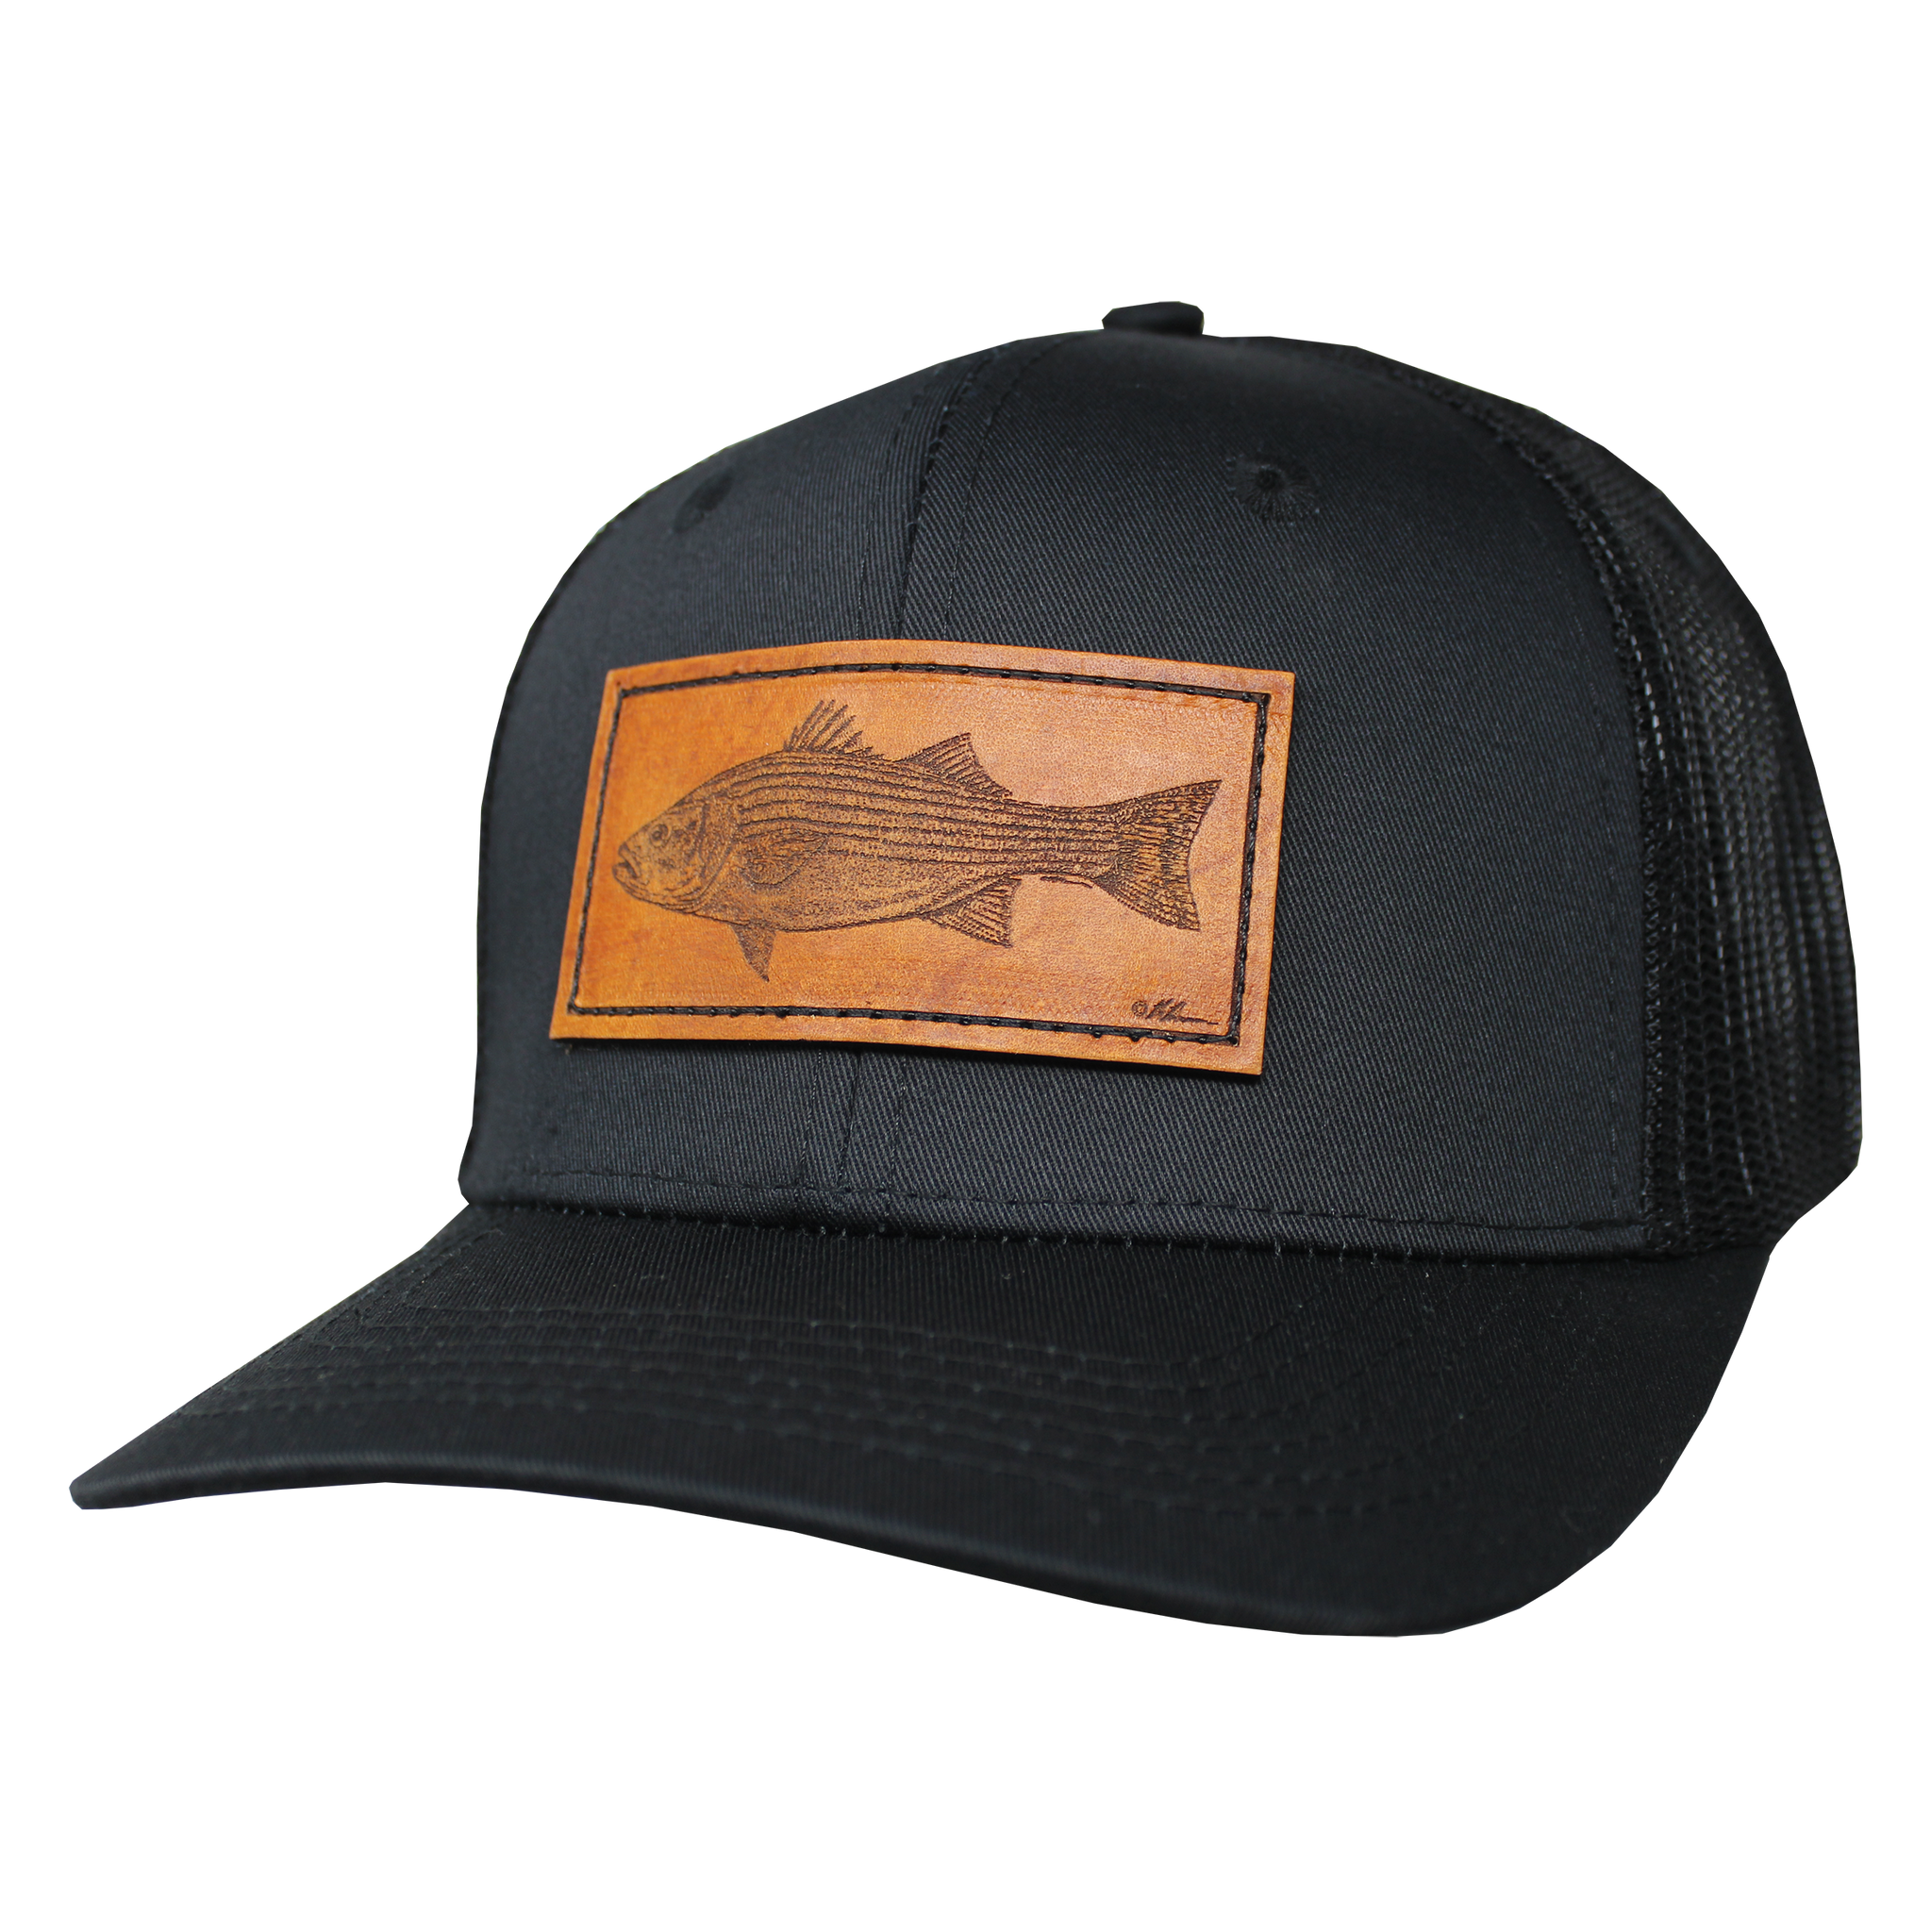 Elevate your outdoor style with Hometown Inspiration's Performance Trucker  Hats. Featuring moisture-wicking technology, a stylish mid-profile frame,  and genuine leather American-made patches. The perfect blend of fashion and  function for outdoorsmen.